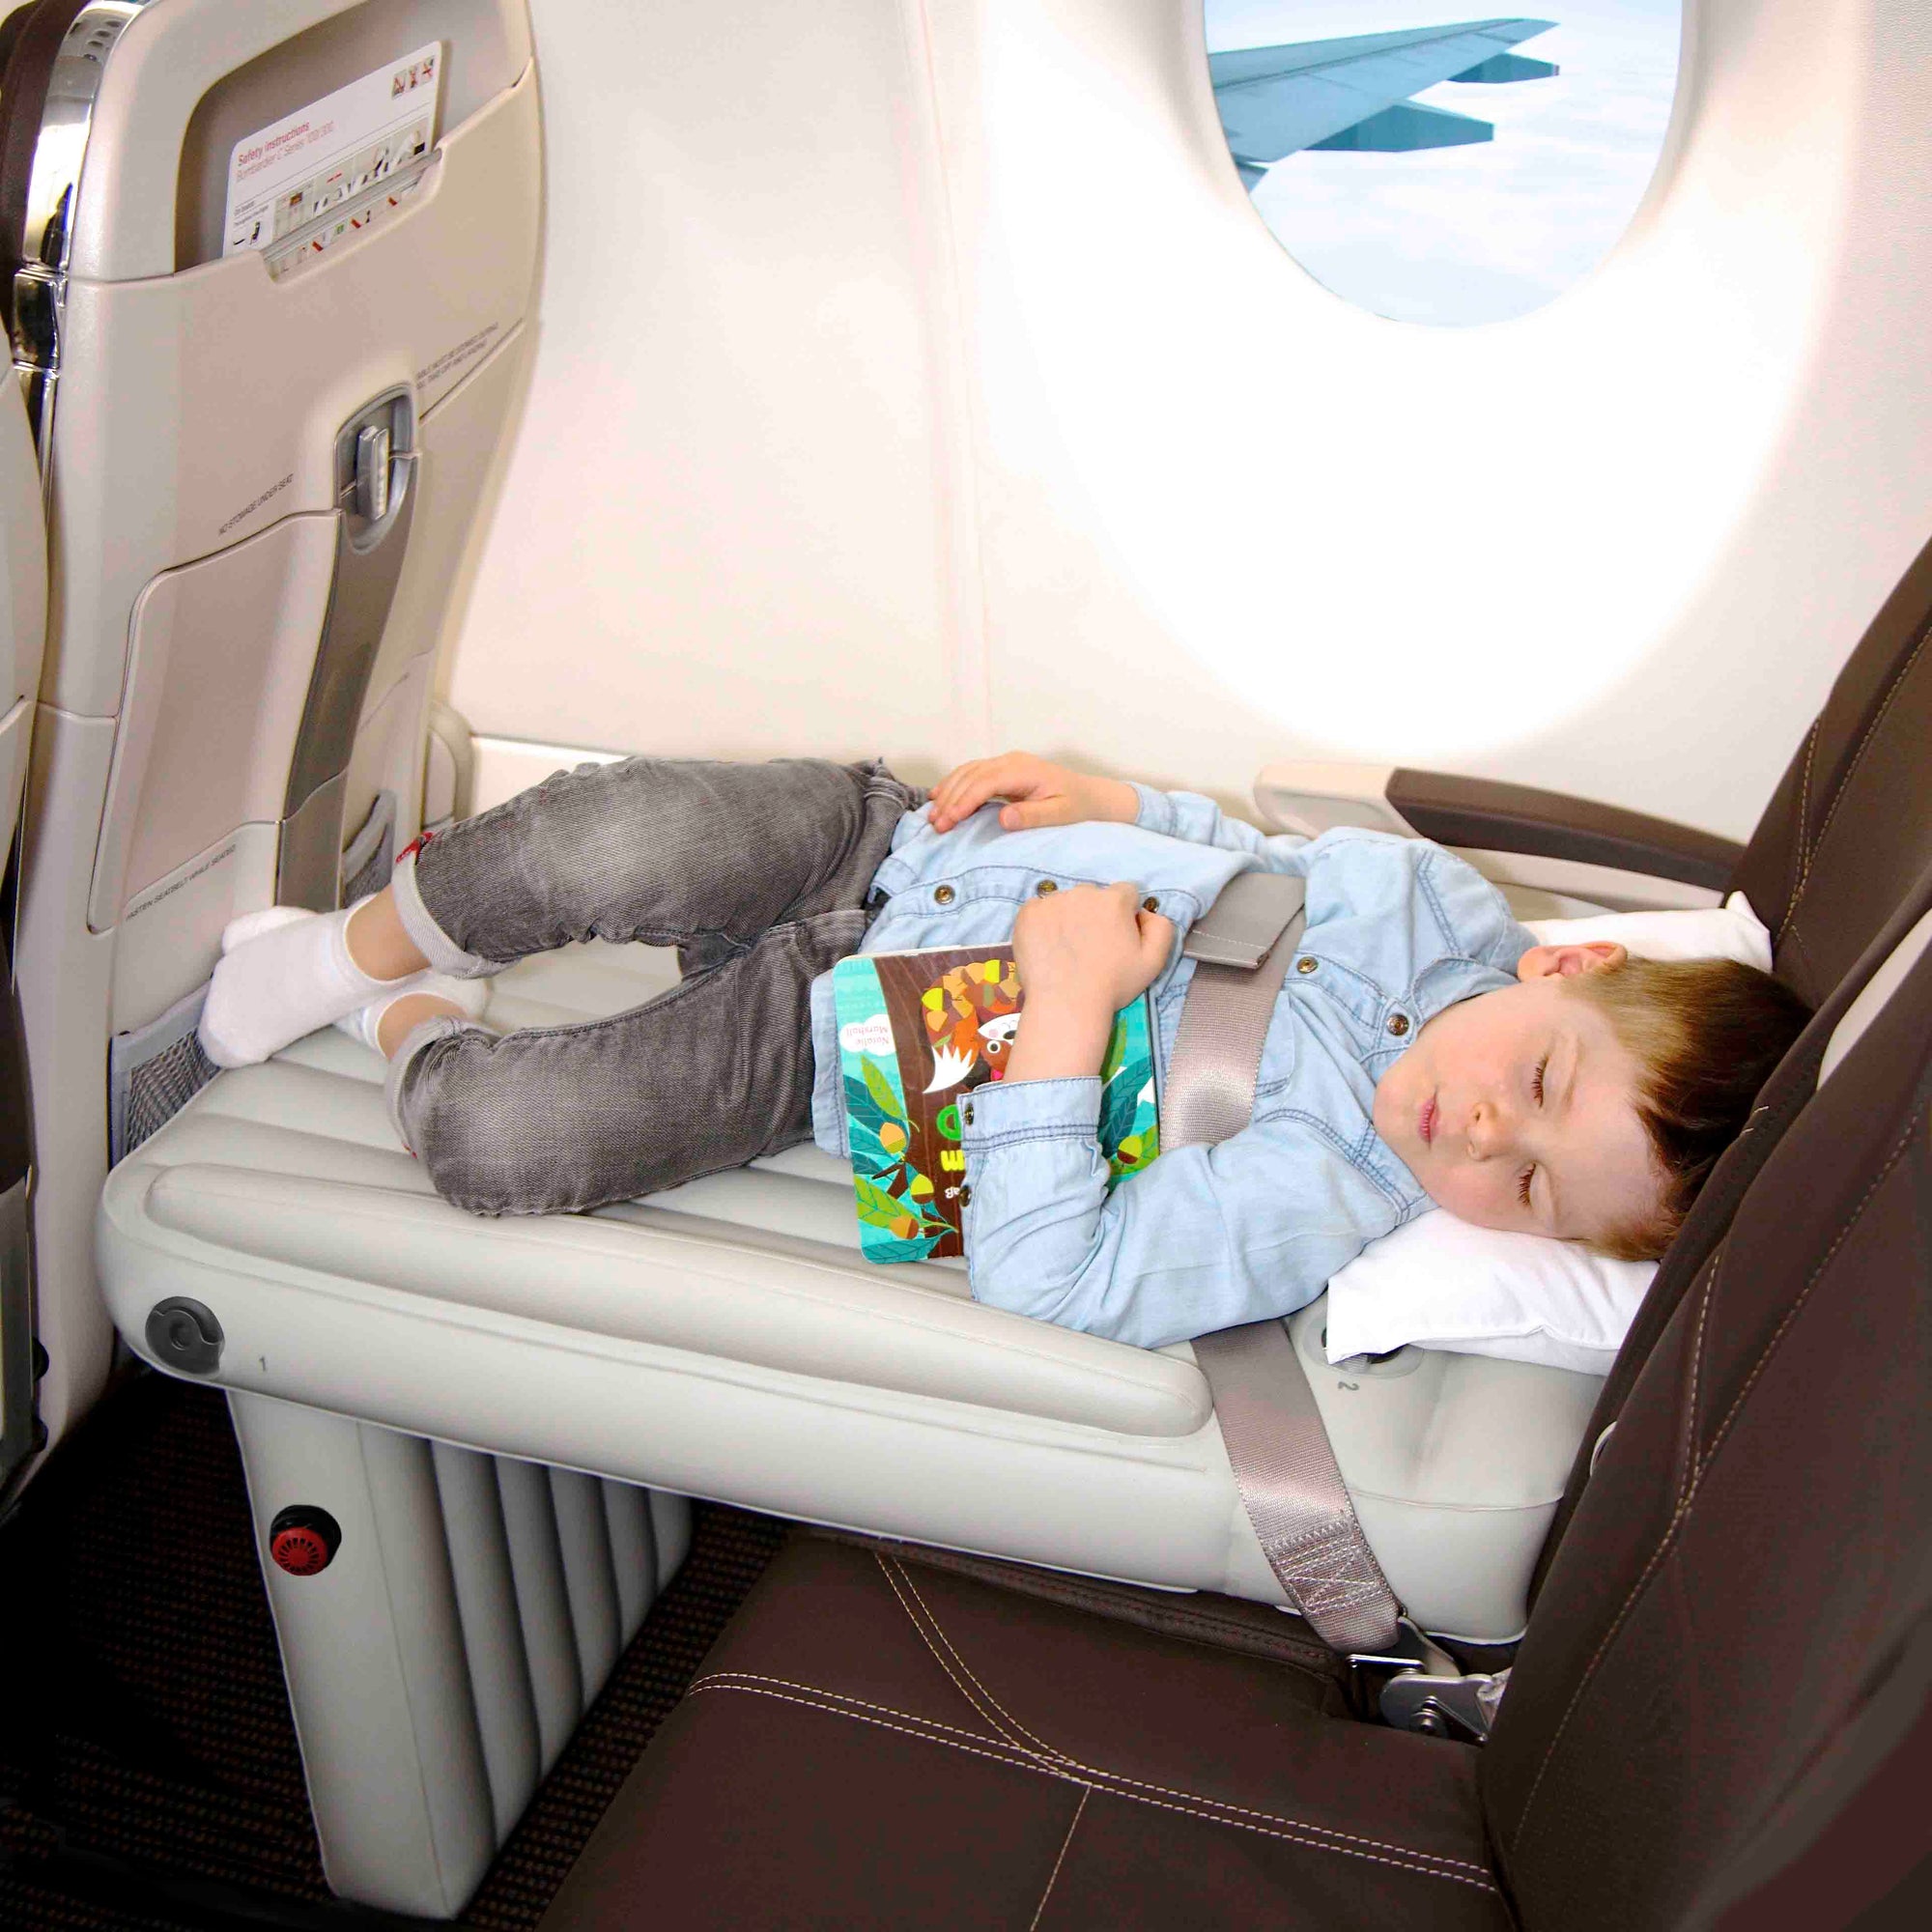 Airplane Footrest,Travel Toddler Bed,Portable Toddler Bed for